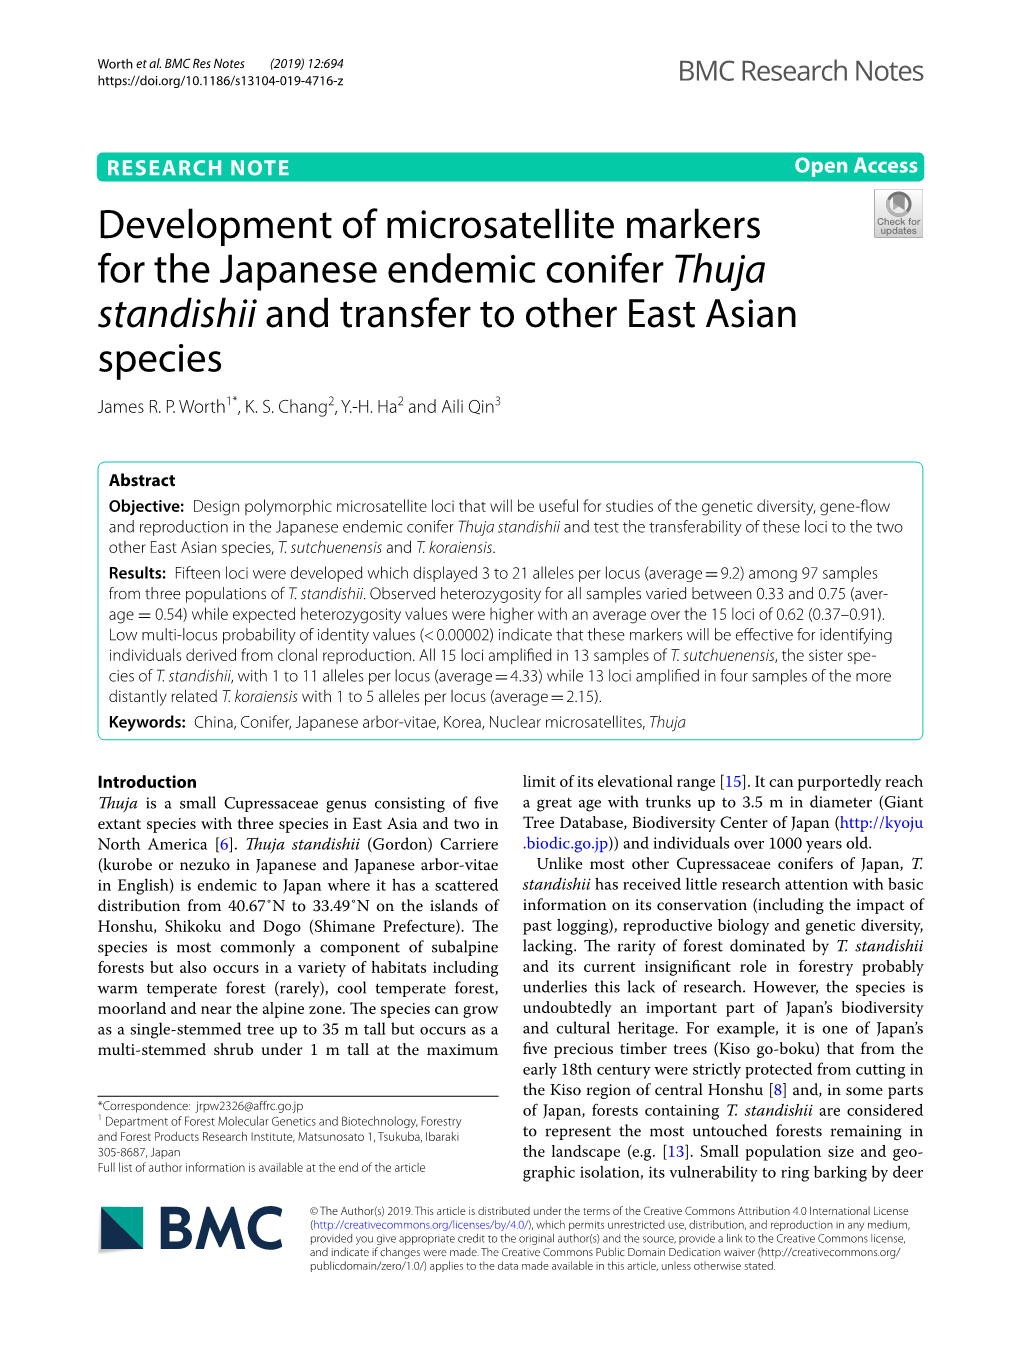 Development of Microsatellite Markers for the Japanese Endemic Conifer Thuja Standishii and Transfer to Other East Asian Species James R